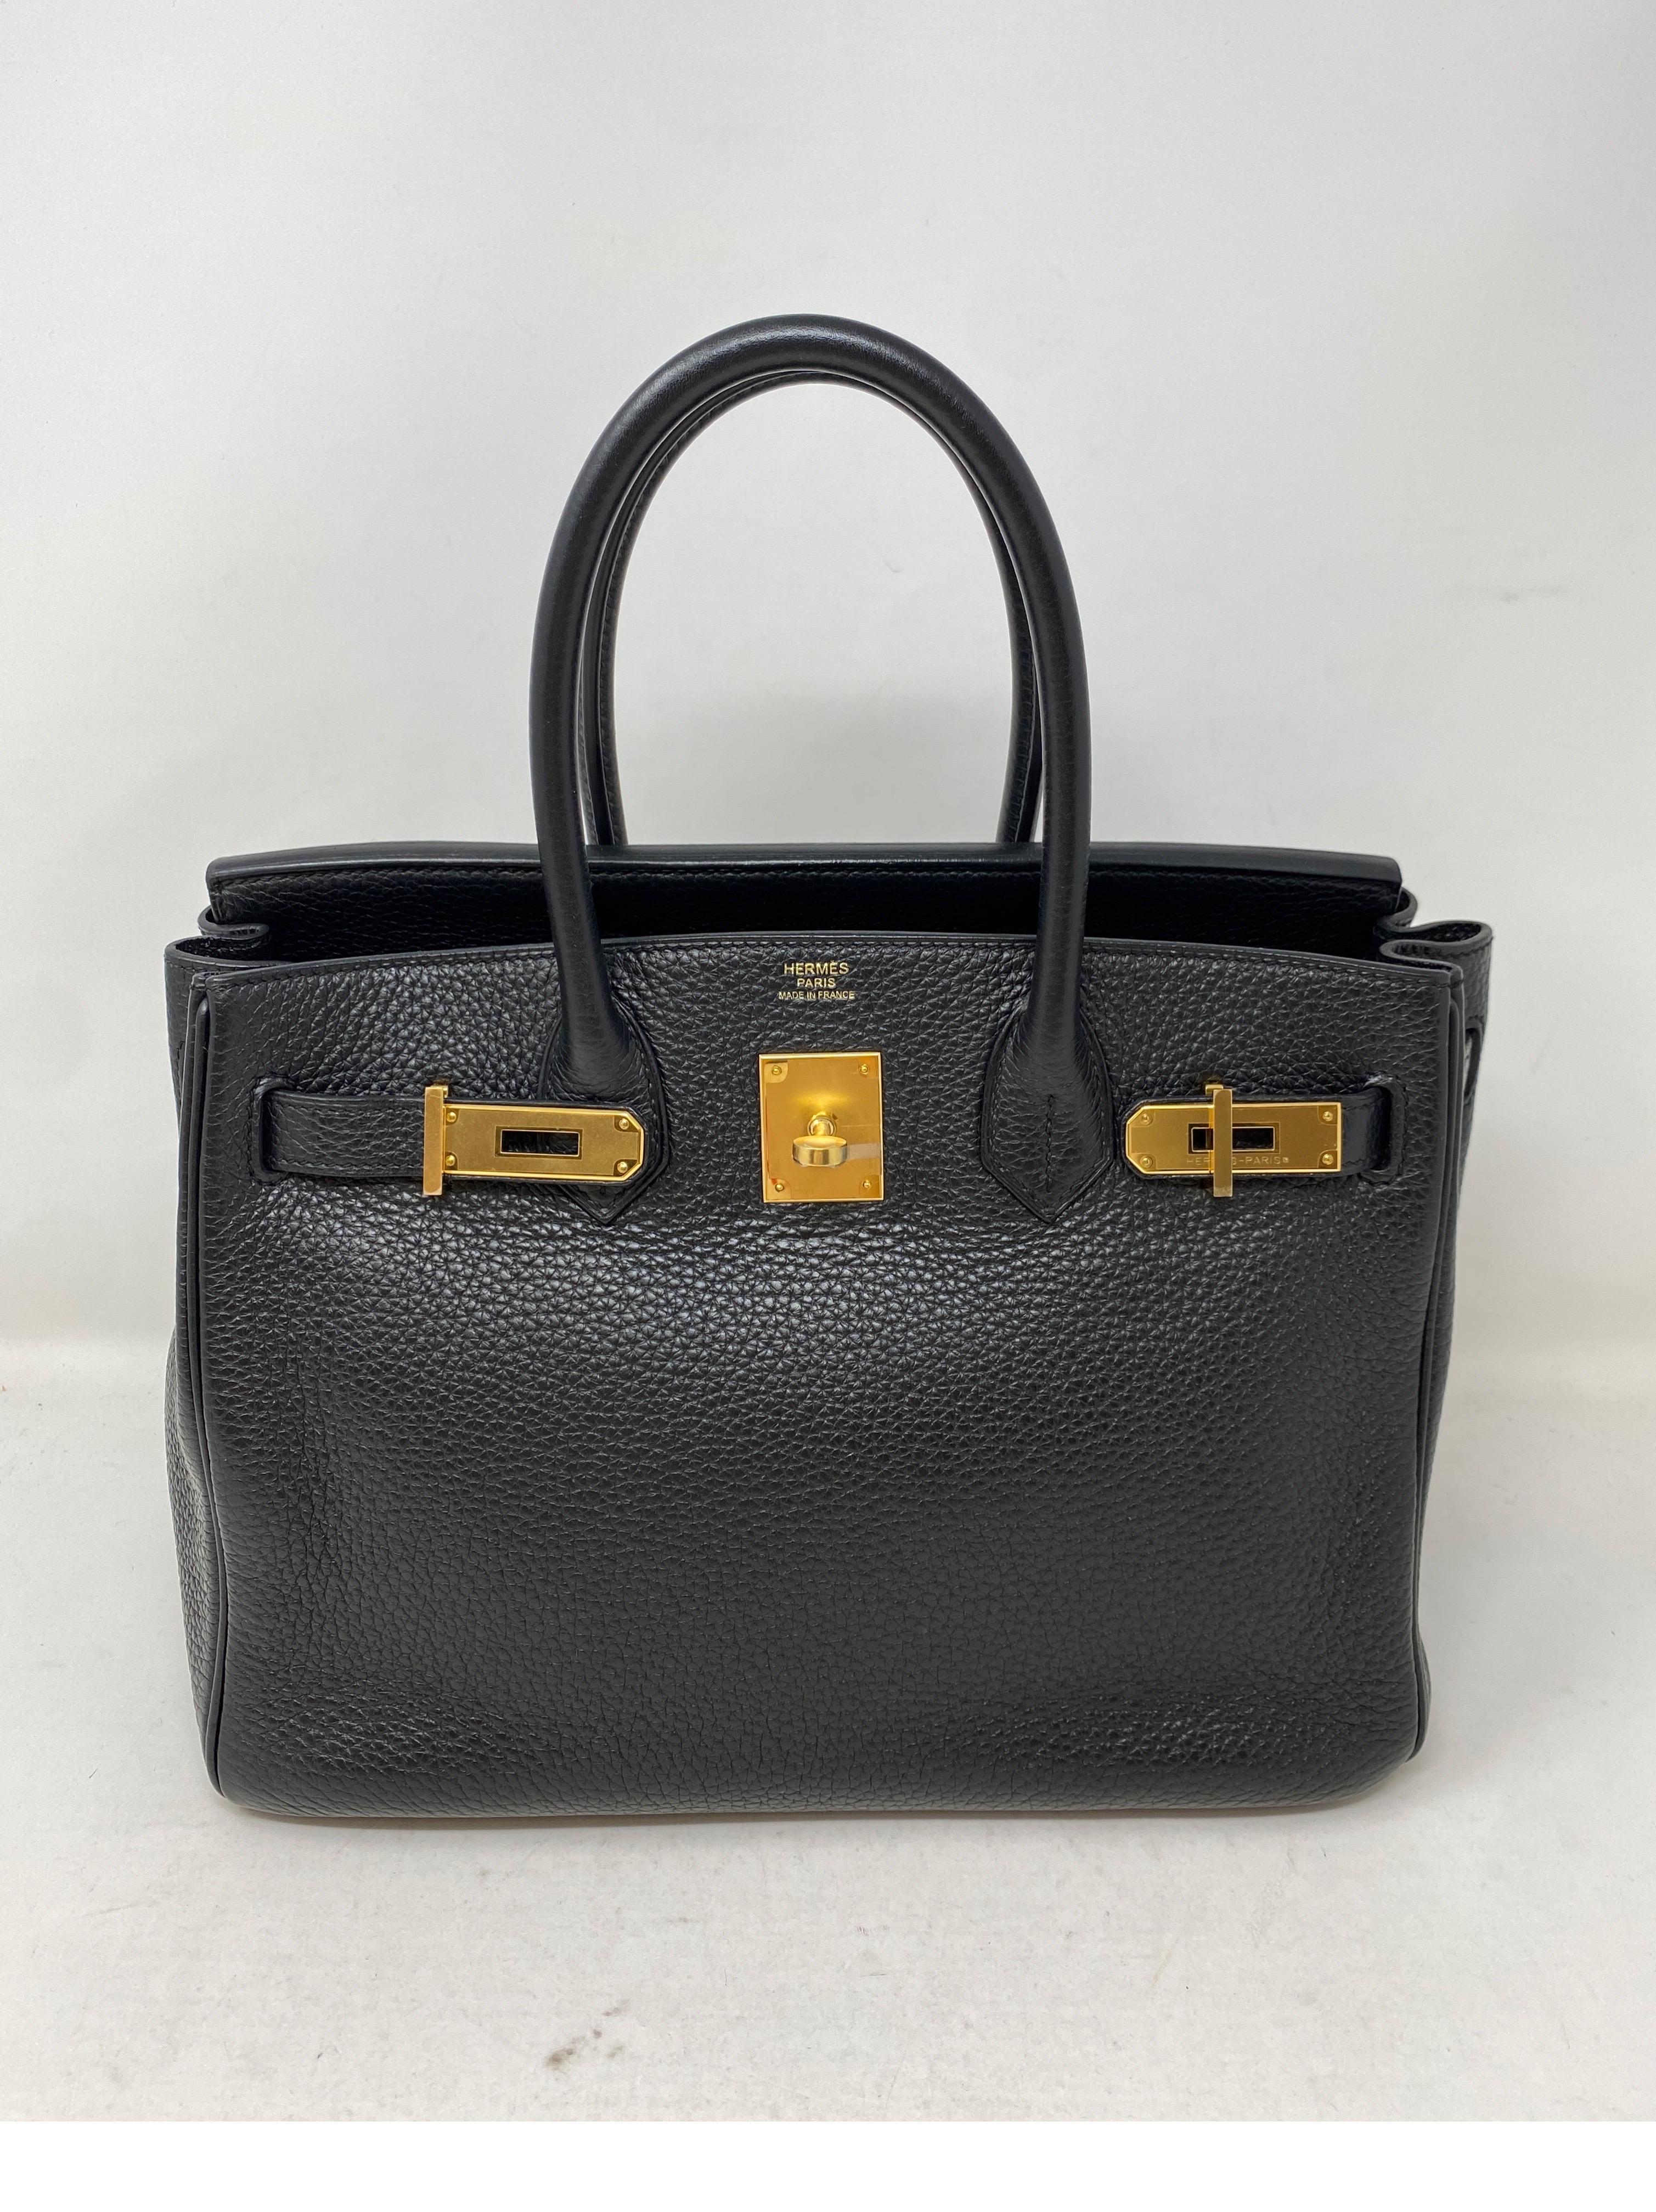 Hermes Birkin 30 Black Bag. Clemence leather. Gold hardware. Excellent looks like new condition. The most wanted and rare size 30. Plastic is still on hardware. Don't miss out on the most wanted combination. Includes clochette, lock, keys, and dust